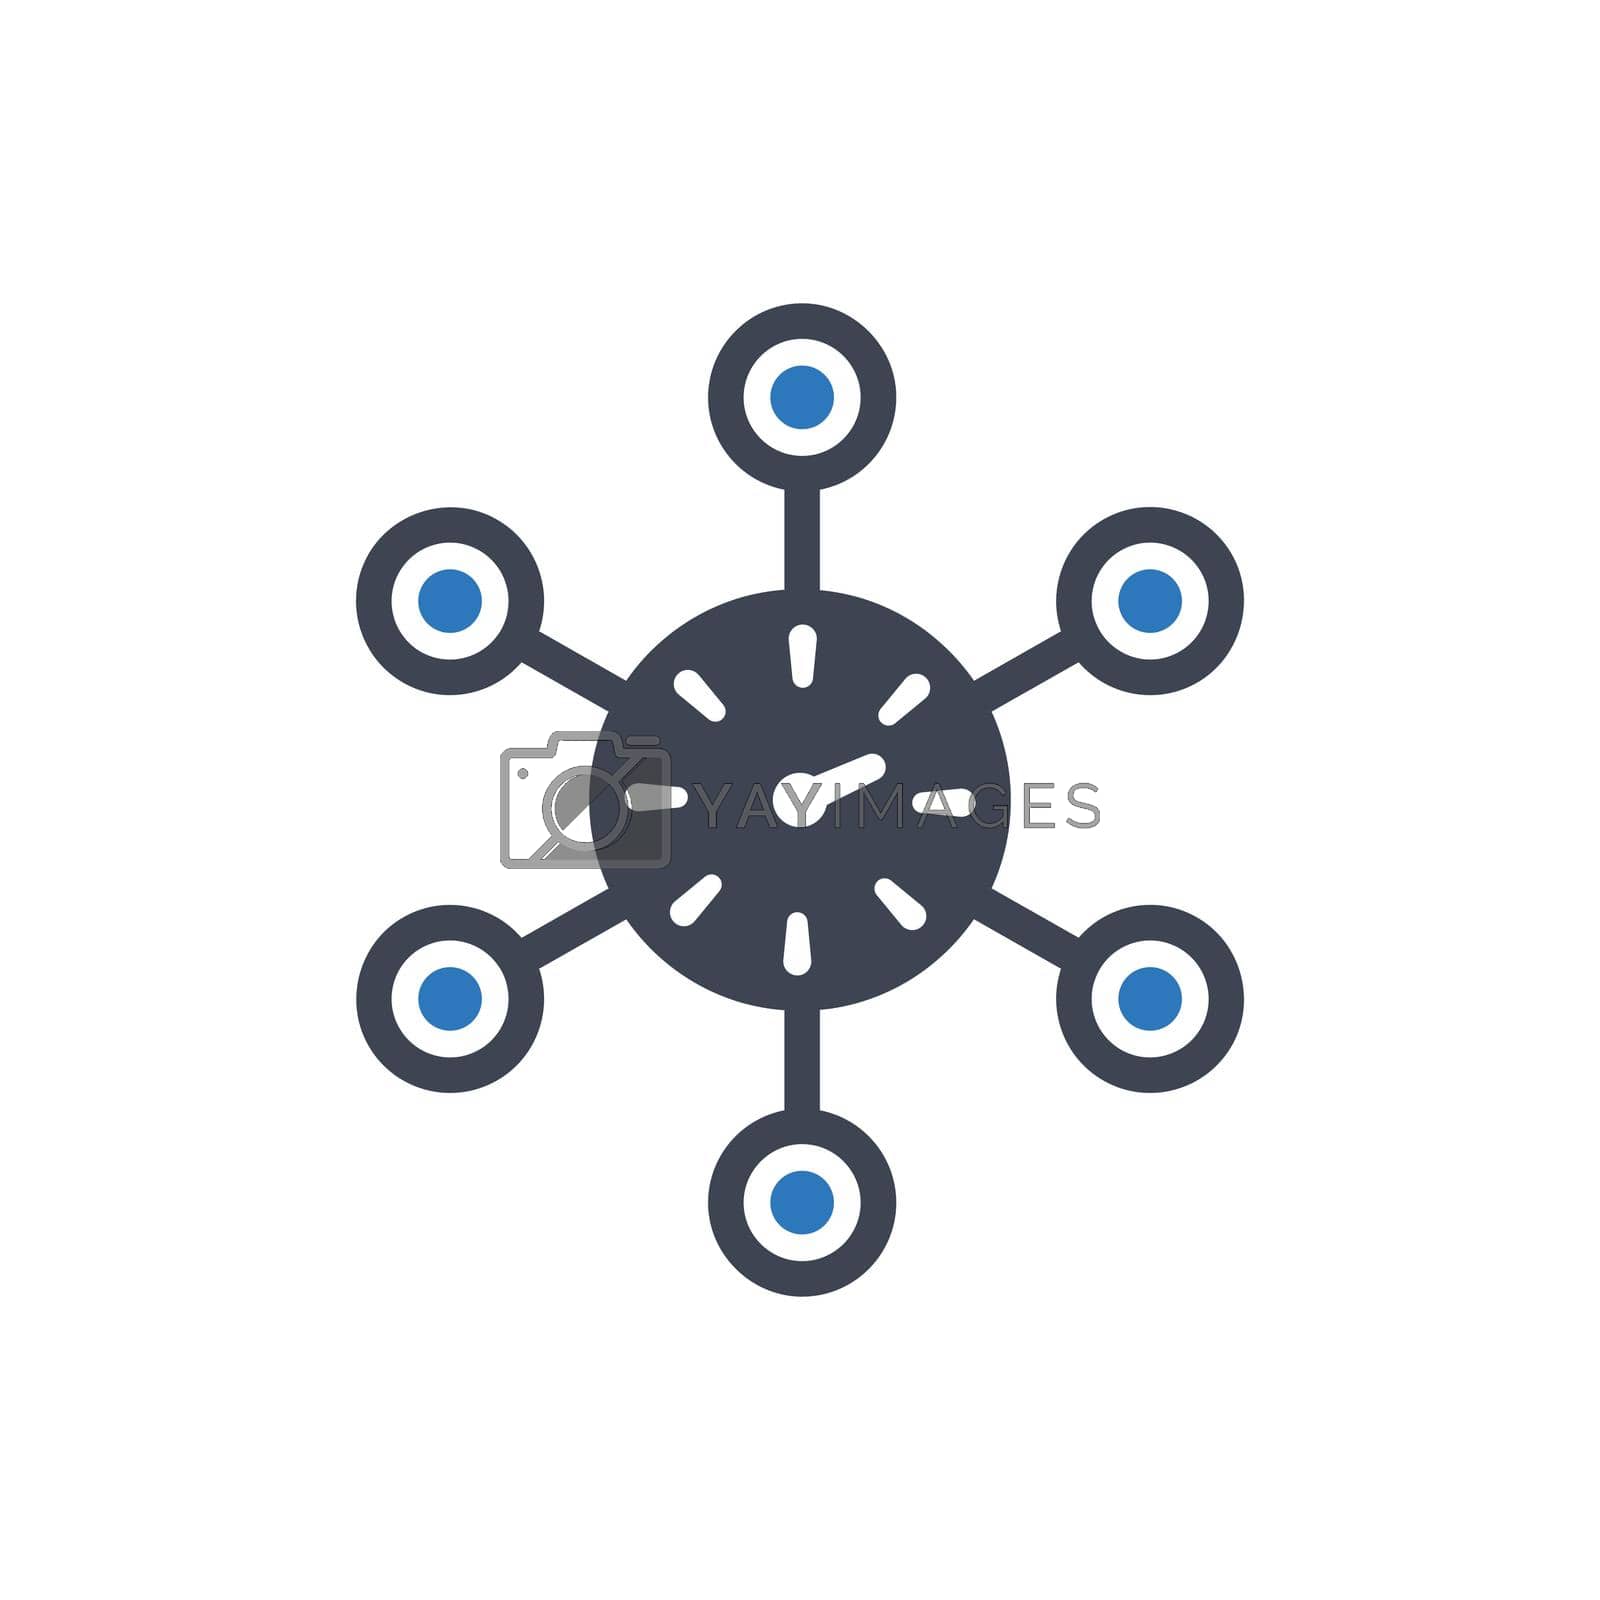 Royalty free image of Time network icon by delwar018